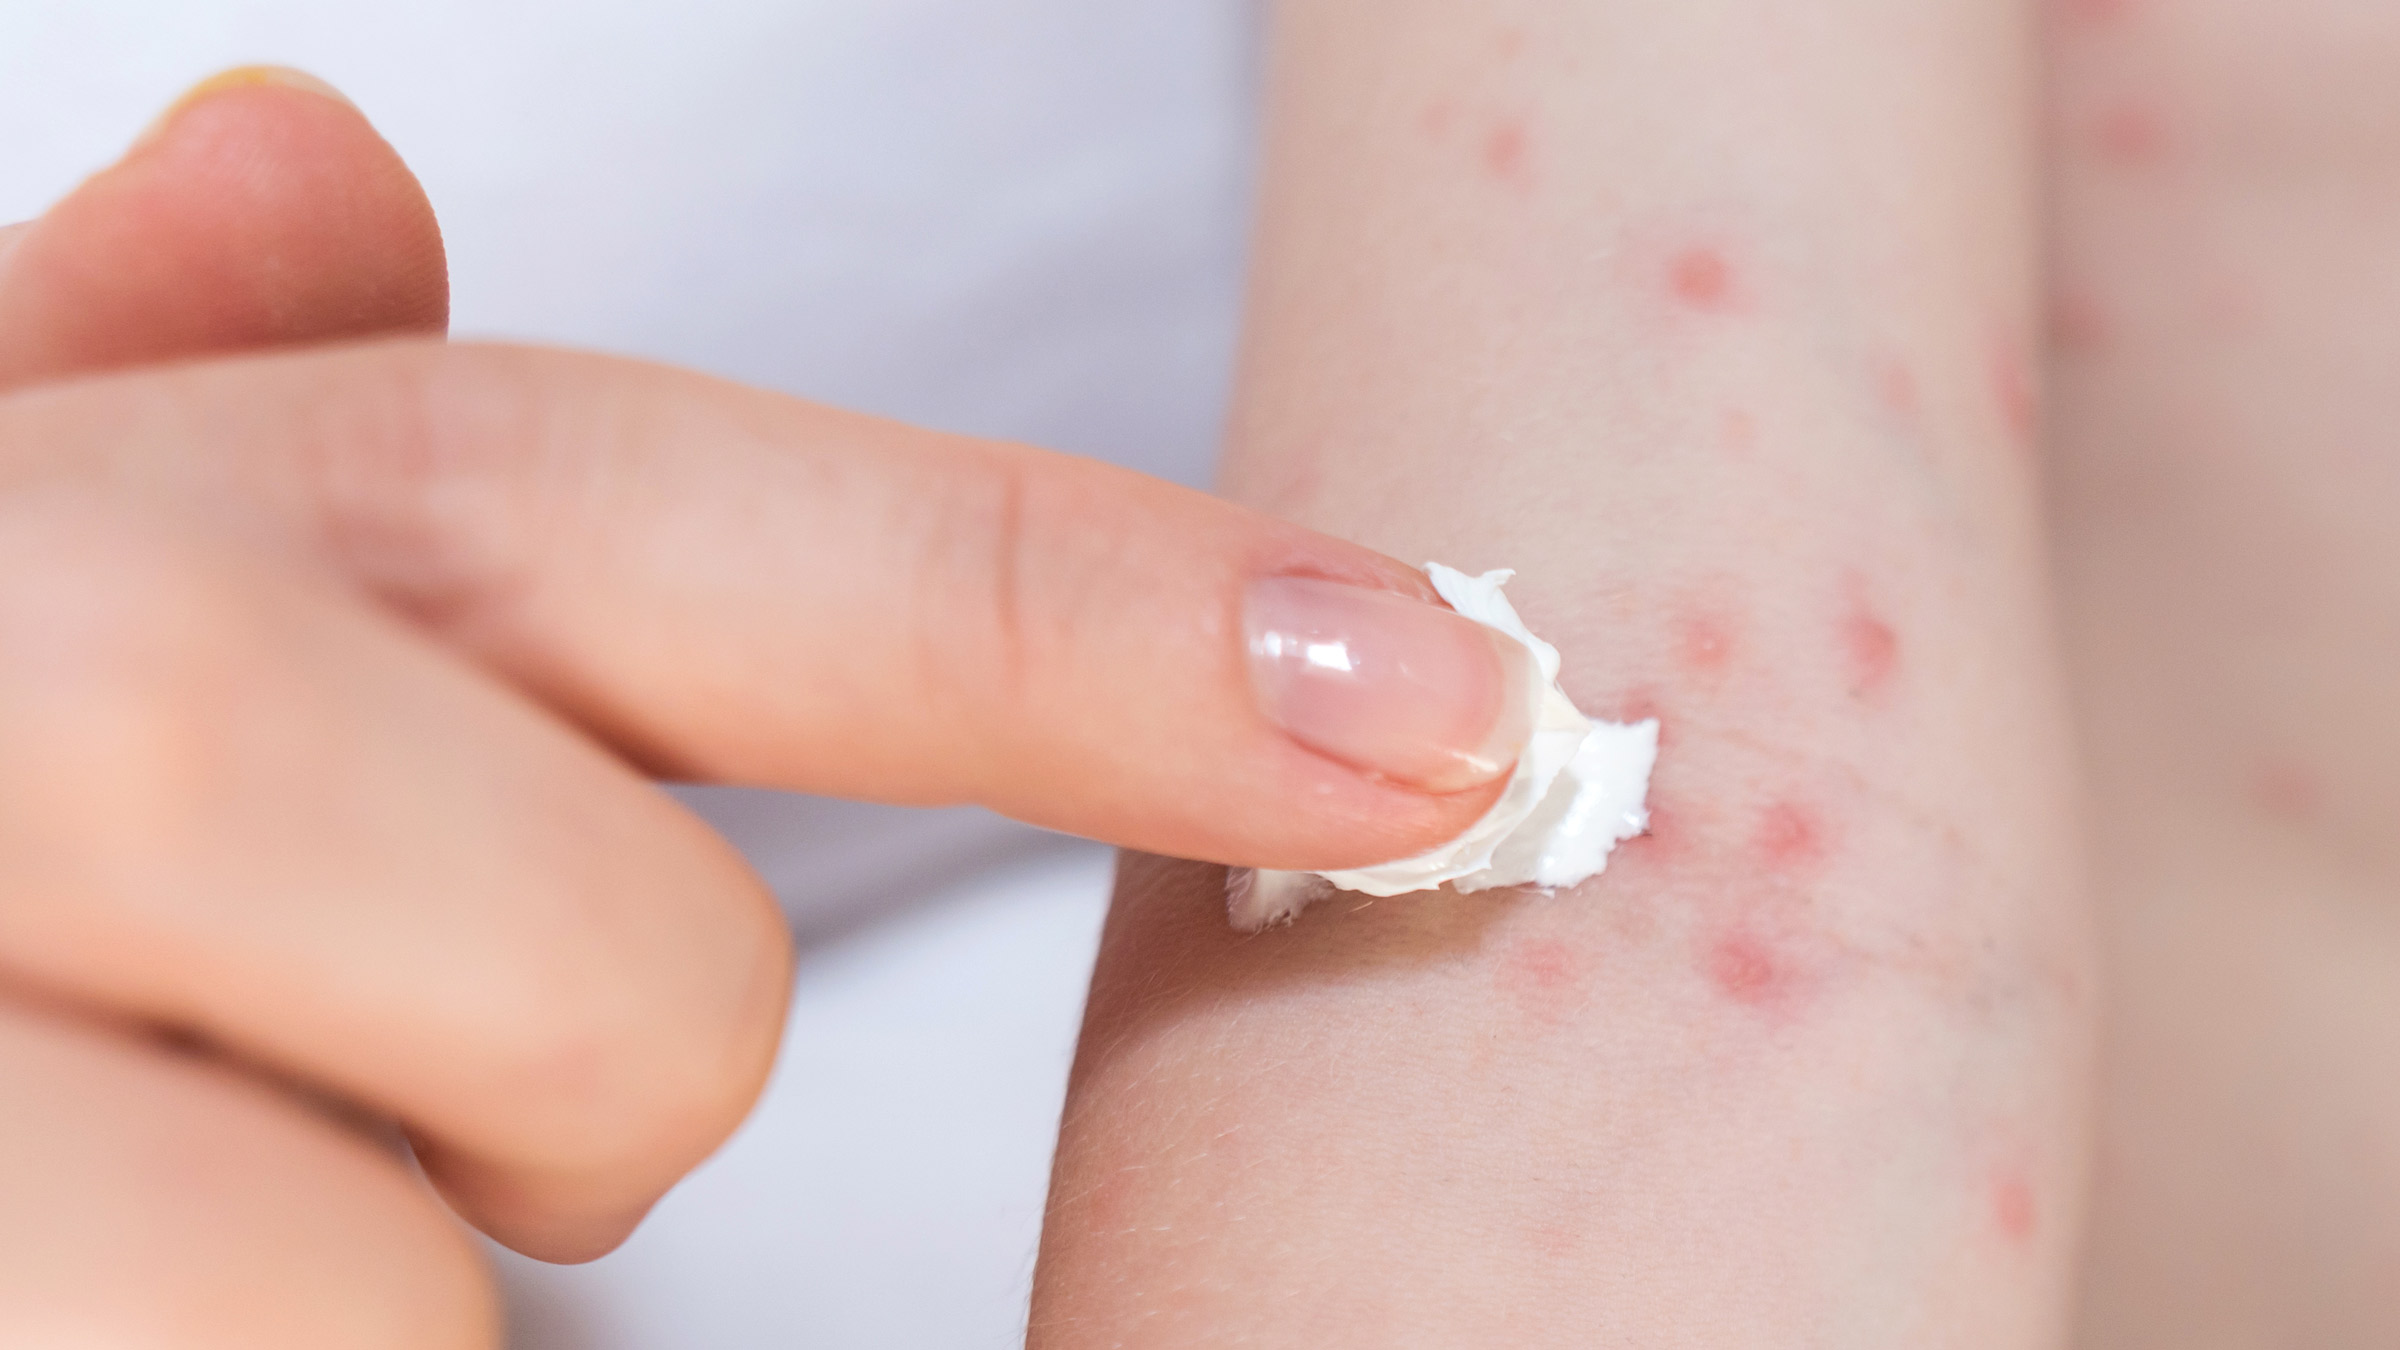 Latex allergy: What it is, causes, symptoms and treatments